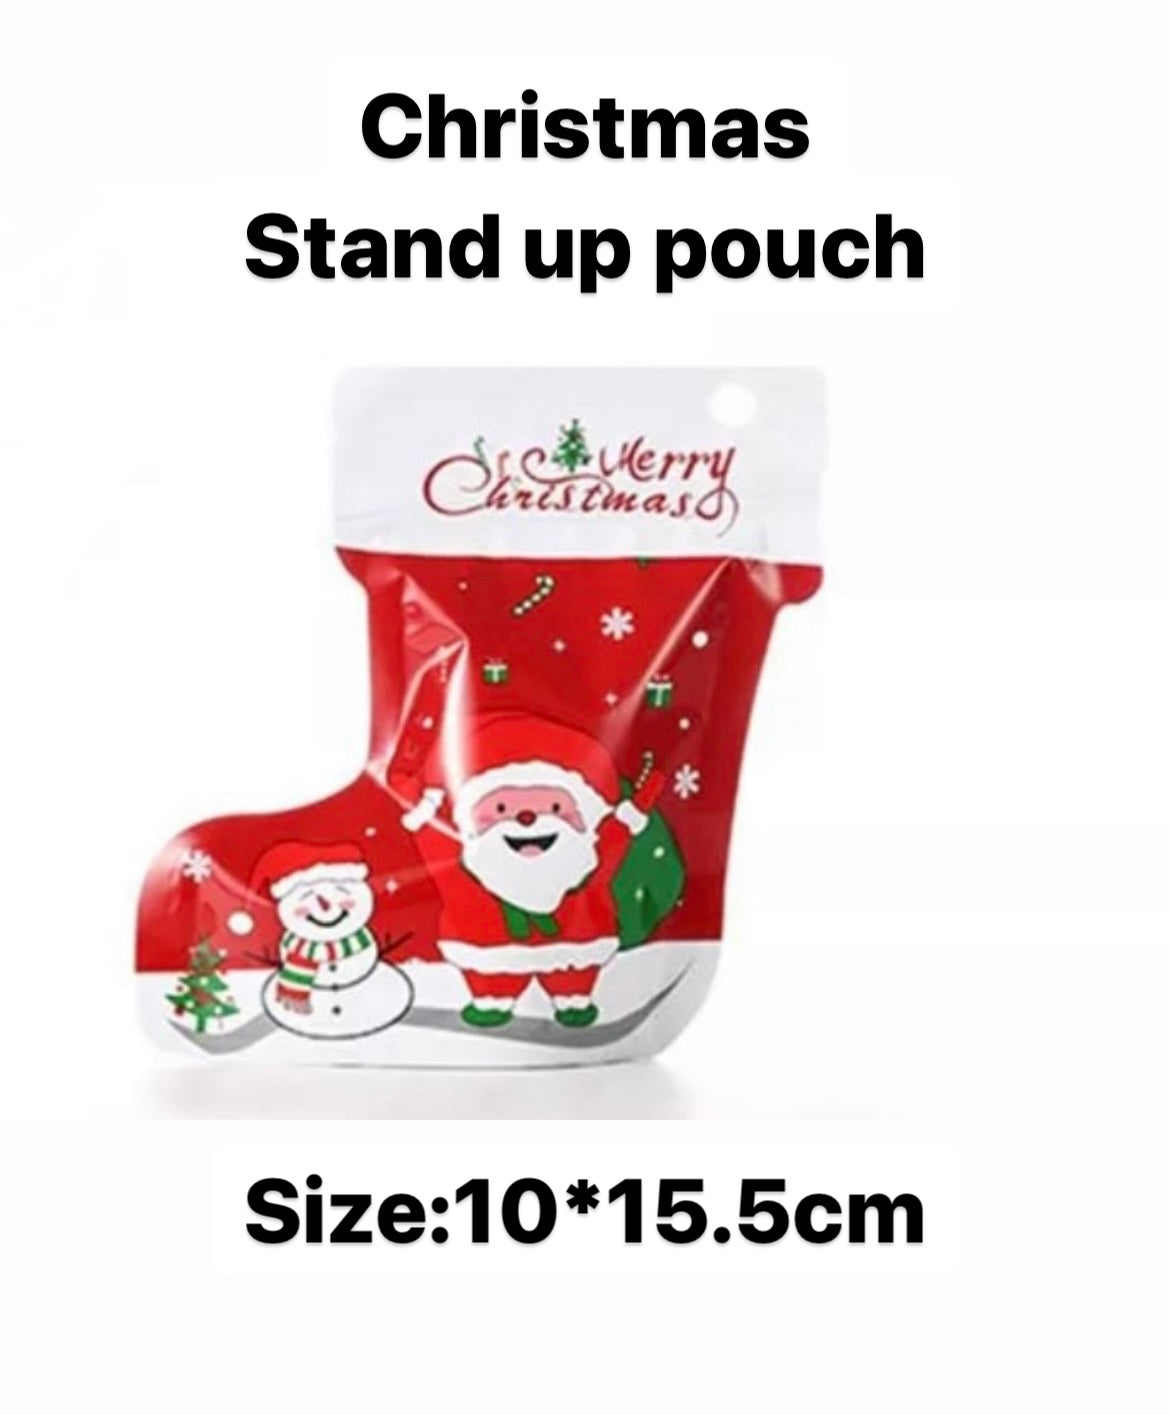 Christmas Shoe Shaped Stand Up Pouch